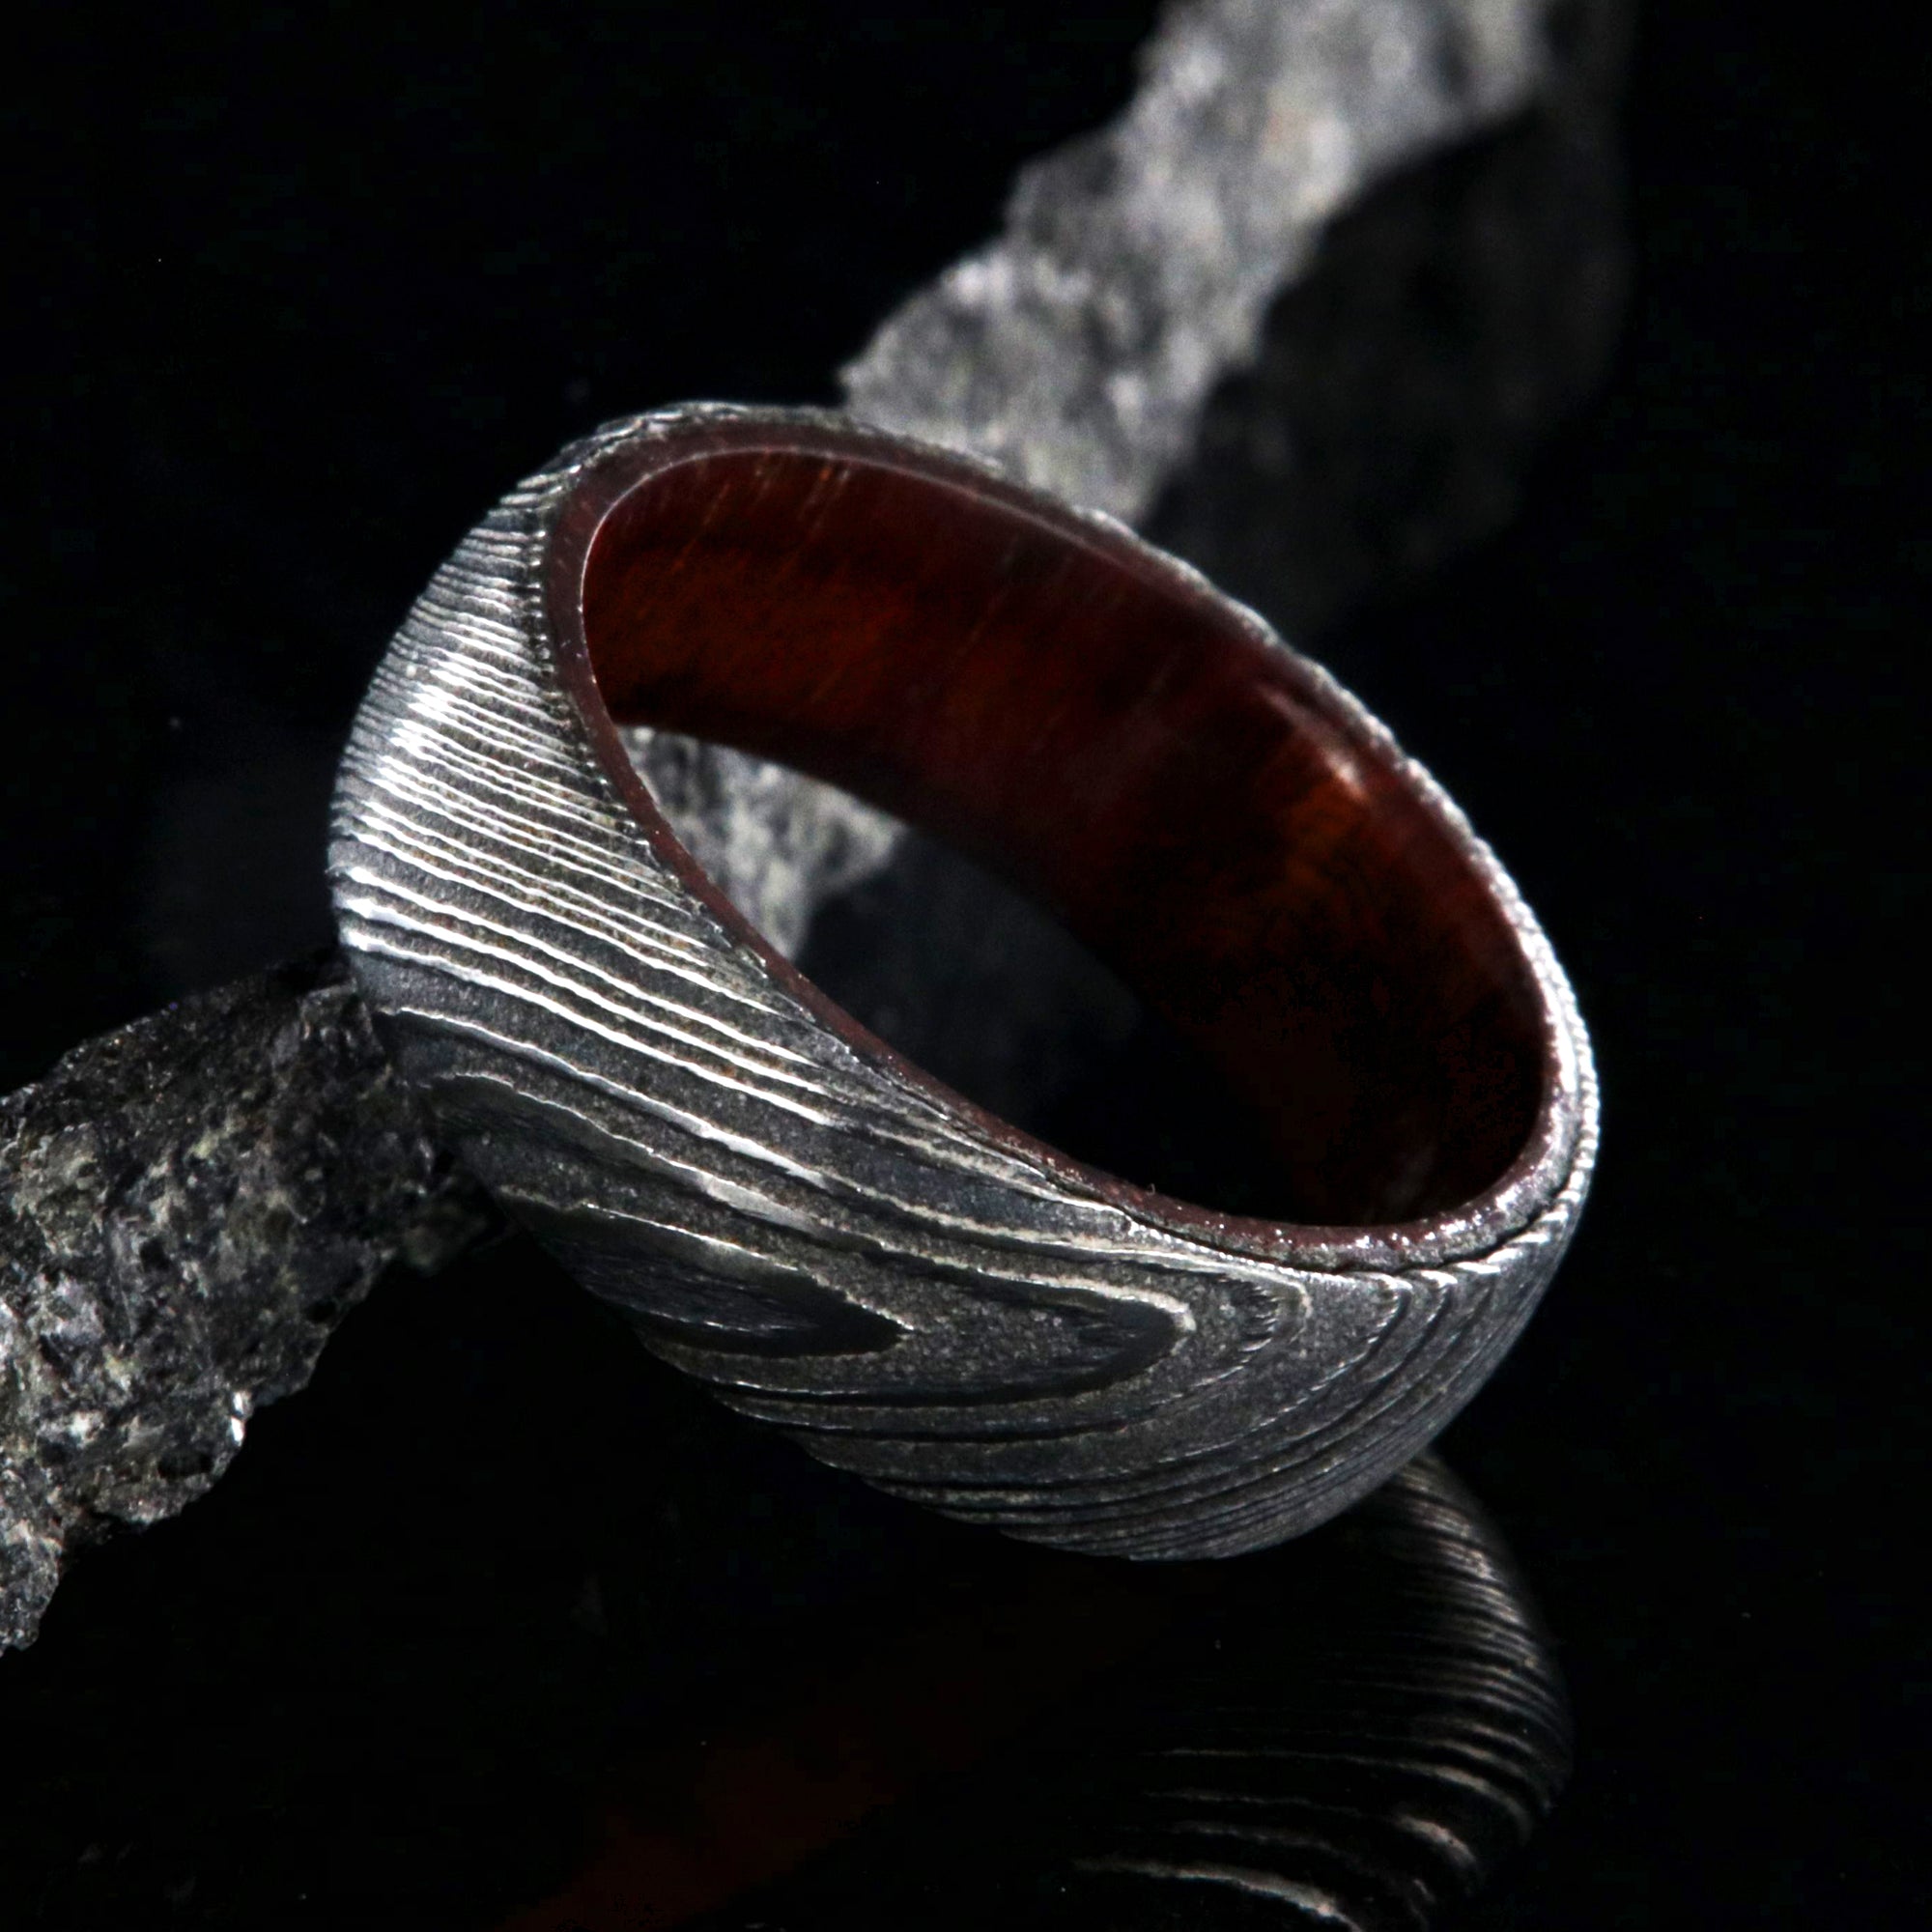 7mm wide black Damascus steel wedding band with a bloodwood sleeve with a rounded profile